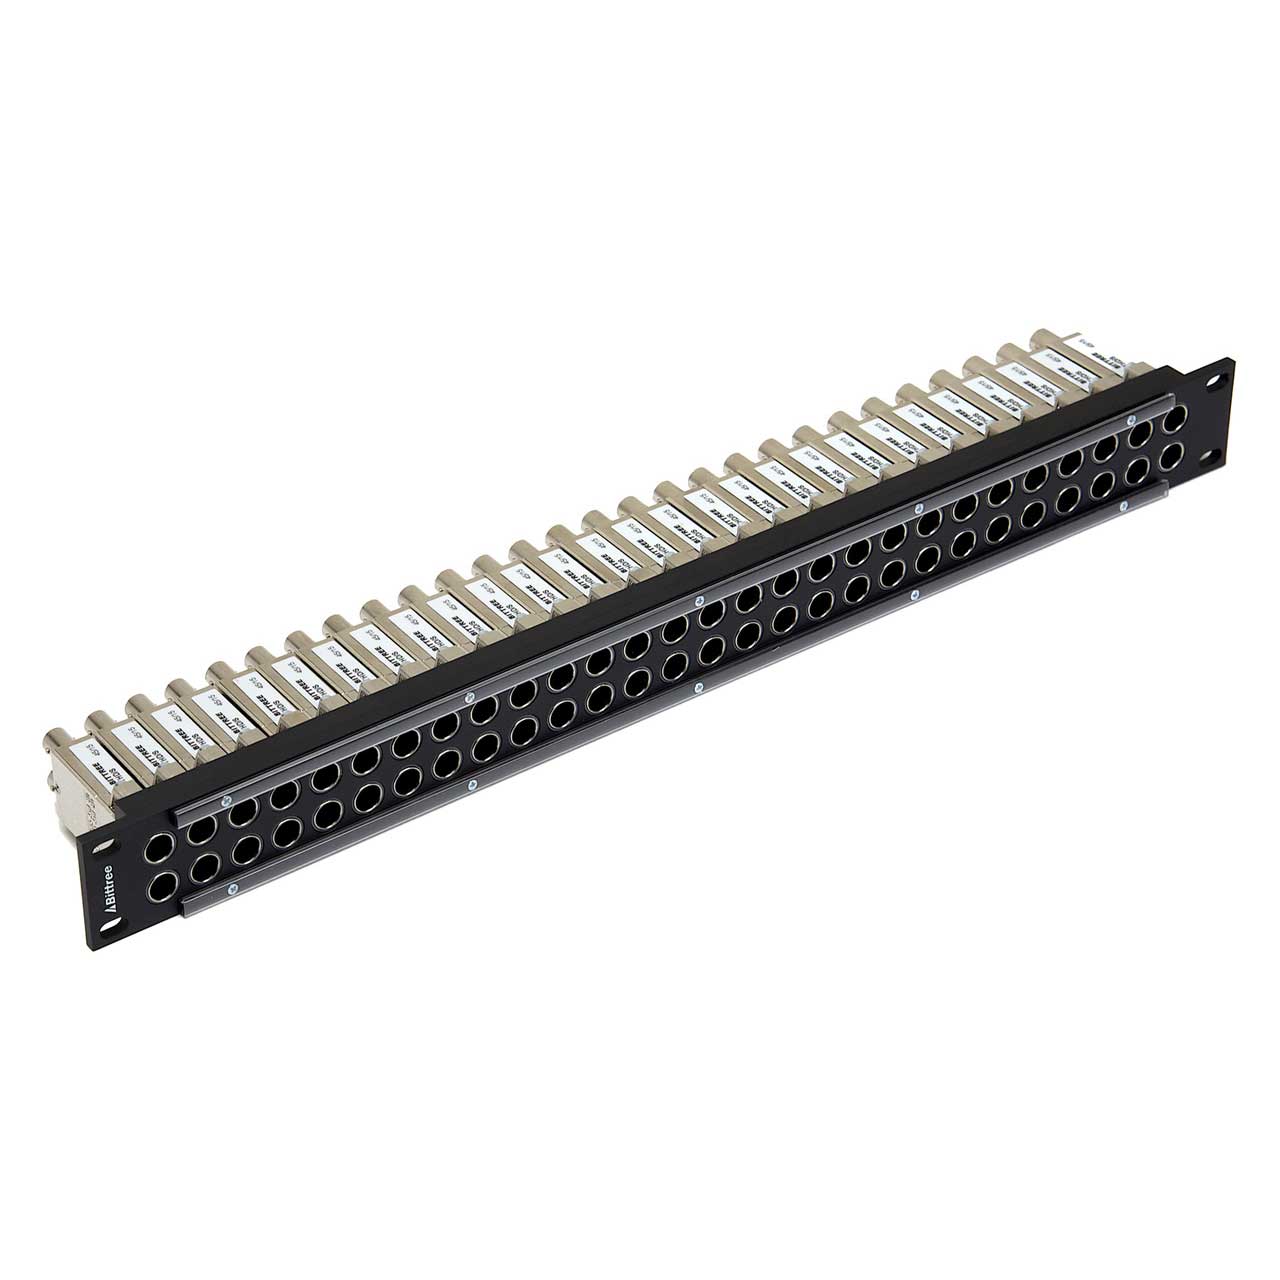 Bittree B56S-1WTHD 2x28 1RU Weco Video Patchbay - 3Ghz Non-Norm/Termination - Dual Body Space 1WTHD/S